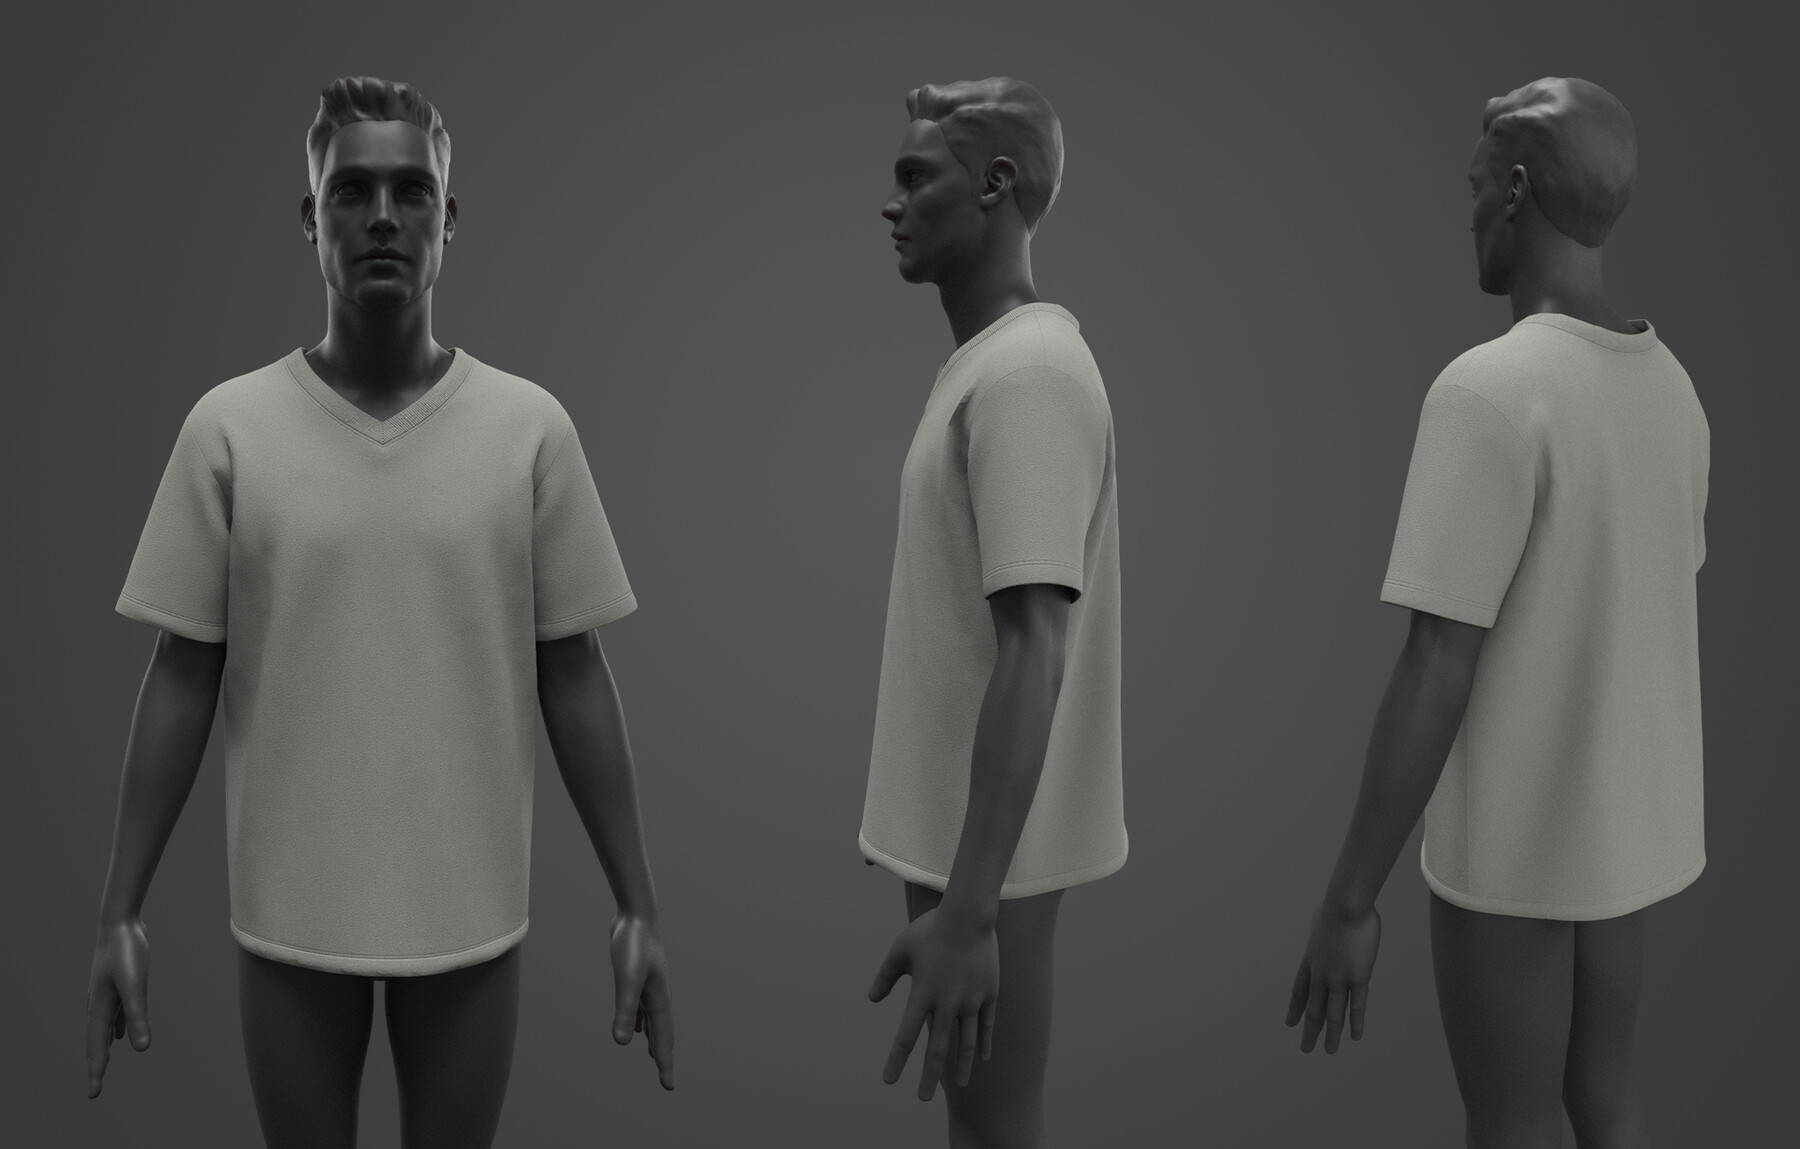 ArtStation - 7 TYPES OF CLOTHES | Resources